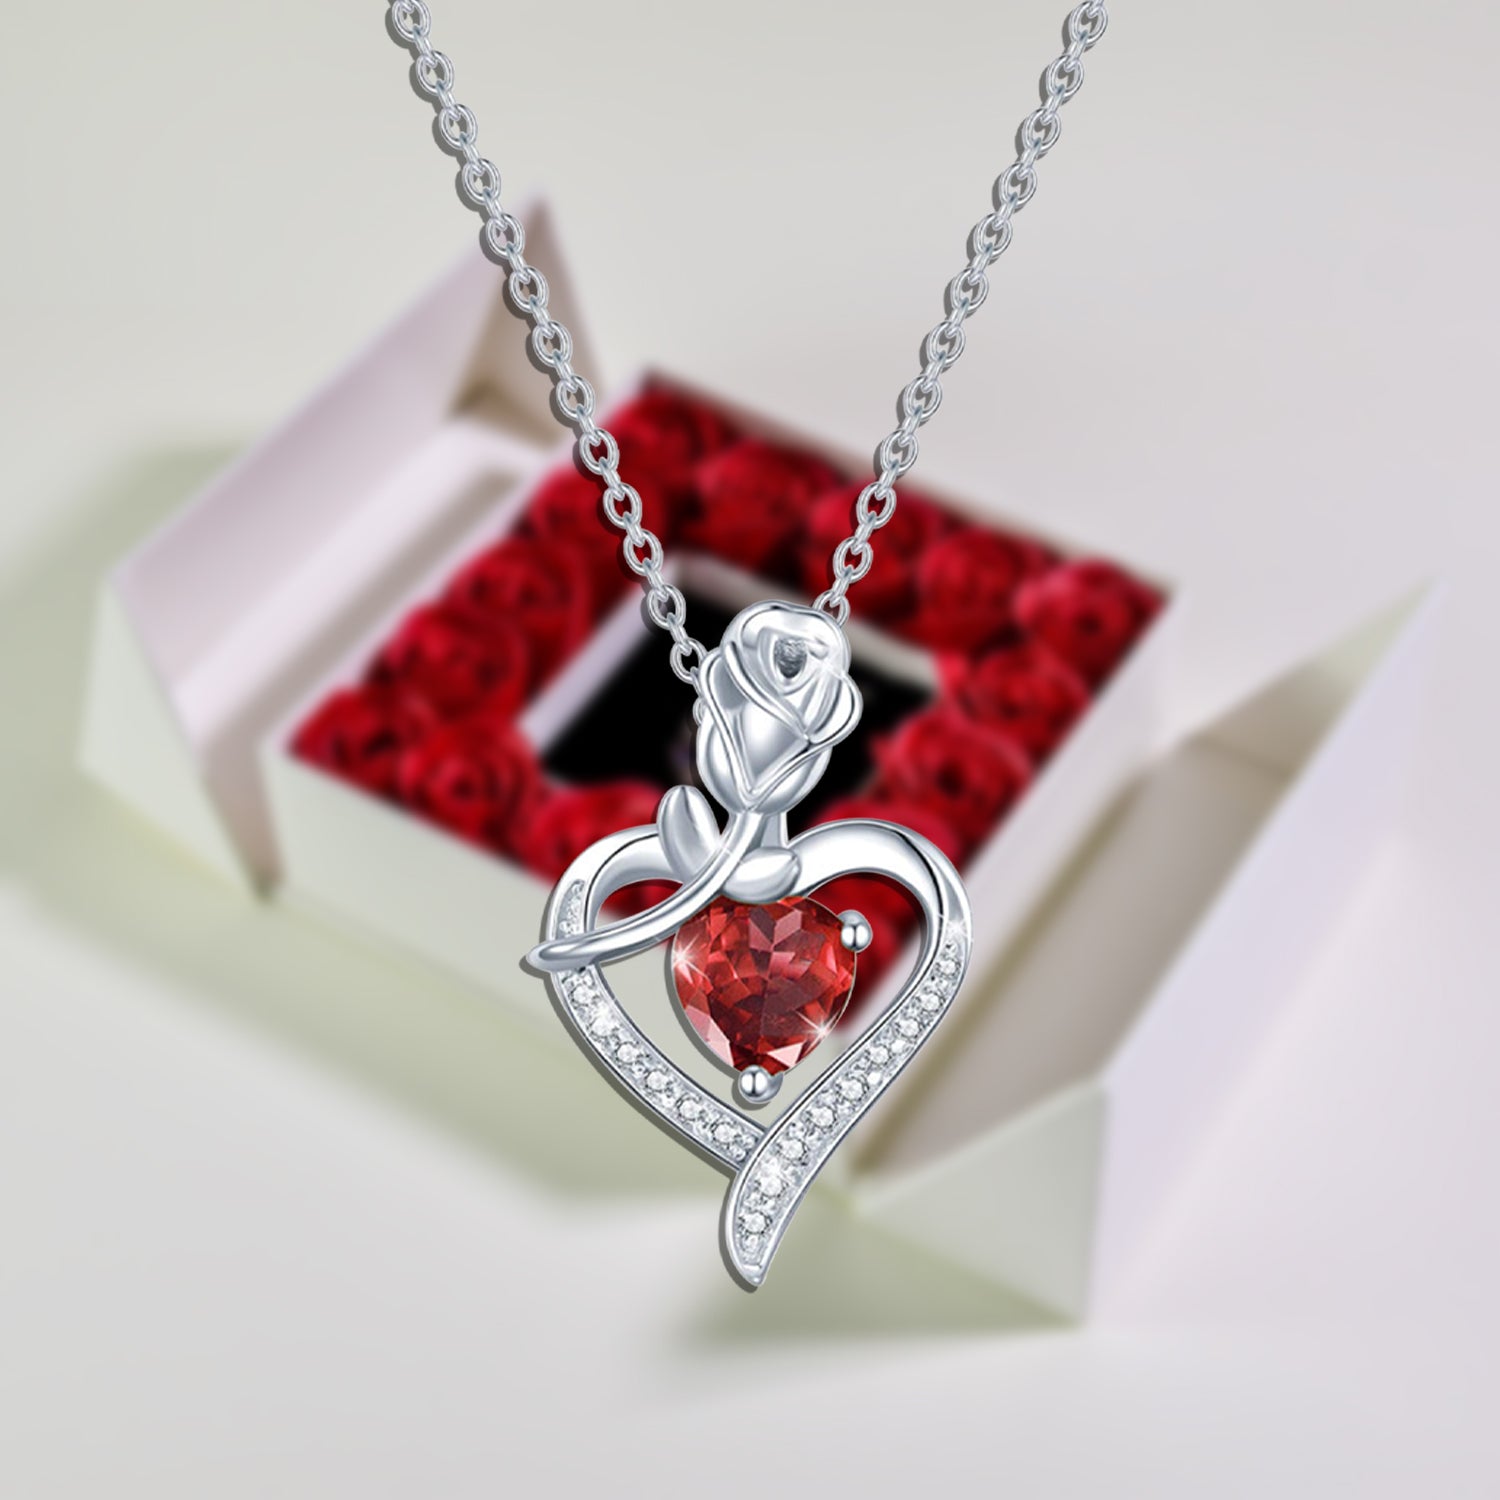 Jewel Heart Necklace Forever Rose Square Jewelry Box white